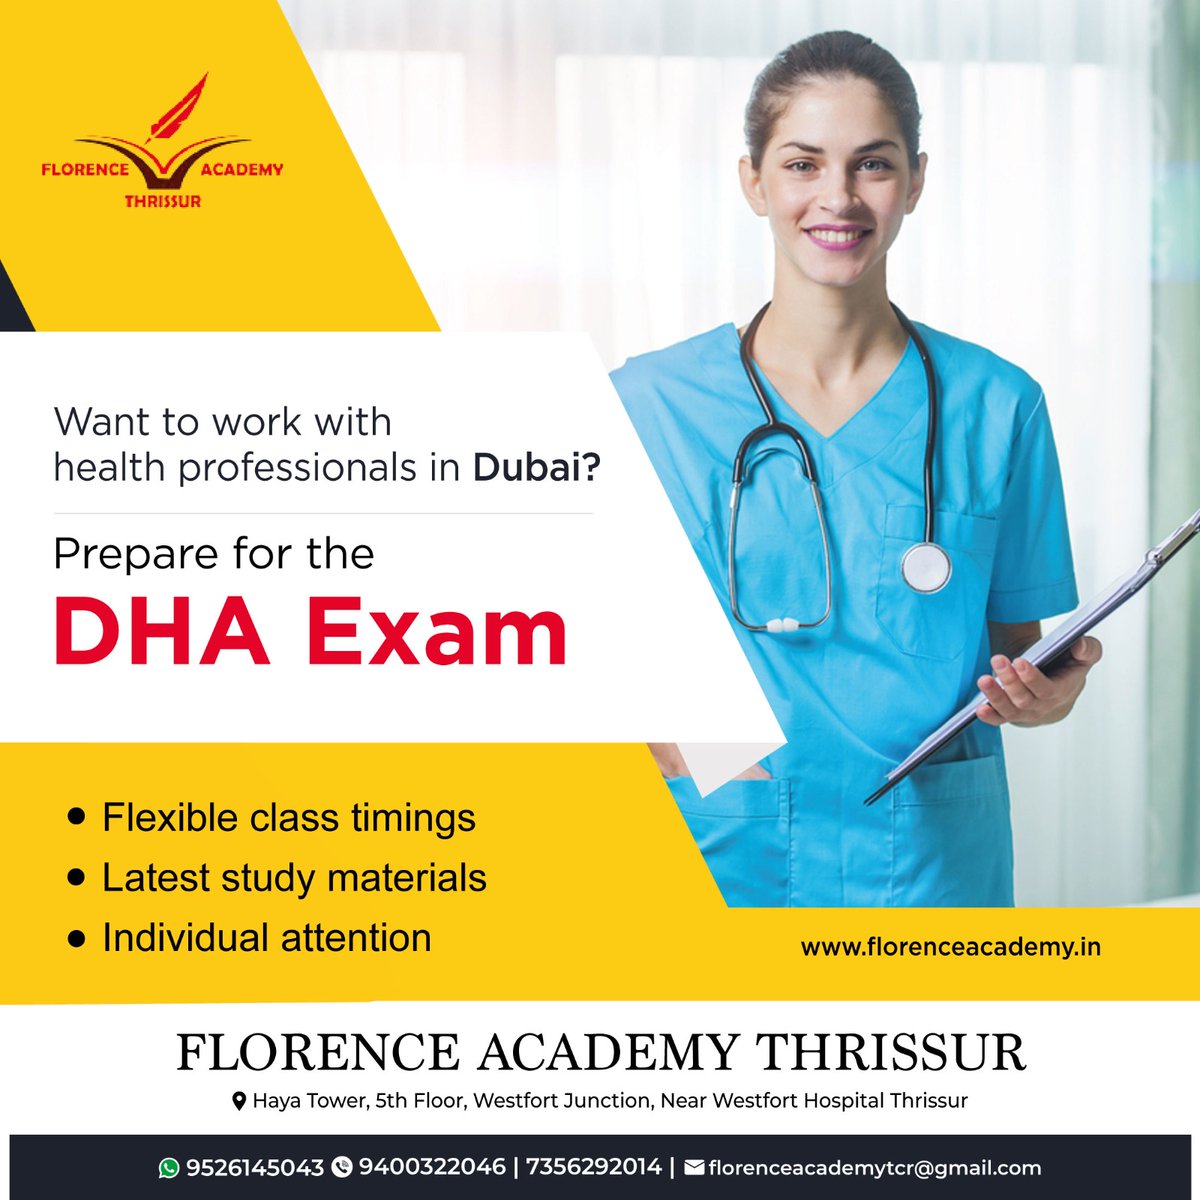 Want to work with health professionals in Dubai? Now with our support prepare for your DHA exams much easier.

#education #ieltsexam #visa #englishvocabulary #ieltswriting #study #help #online #coaching #oetexam #oet #oetonlinecoaching #oetonlineclasses #oetresults #oetinstitute